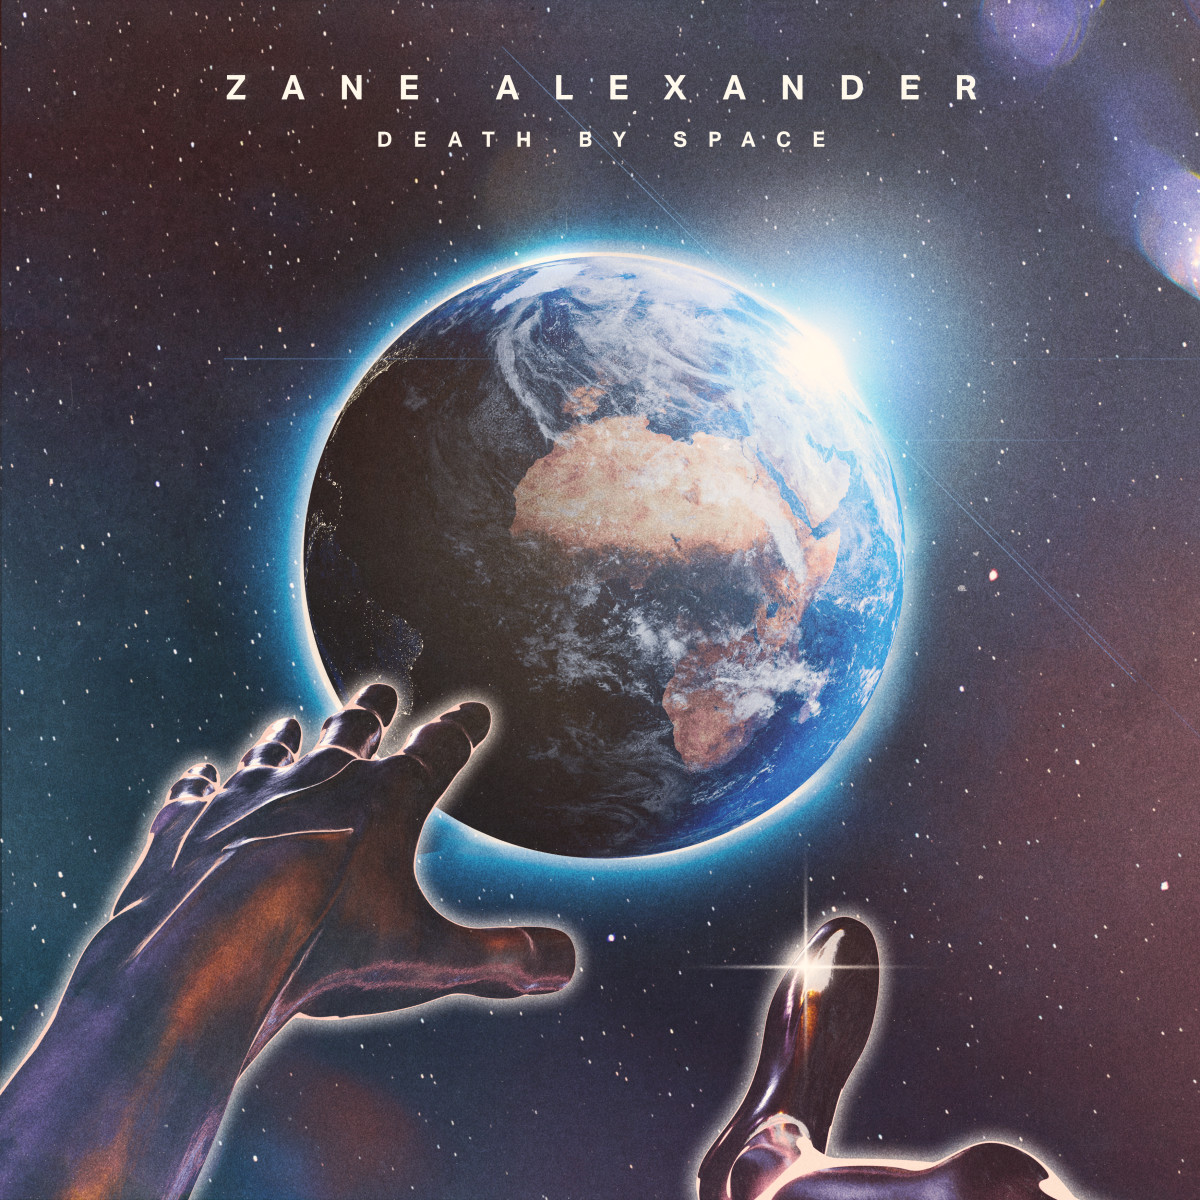 synth-album-review-death-by-space-by-zane-alexander